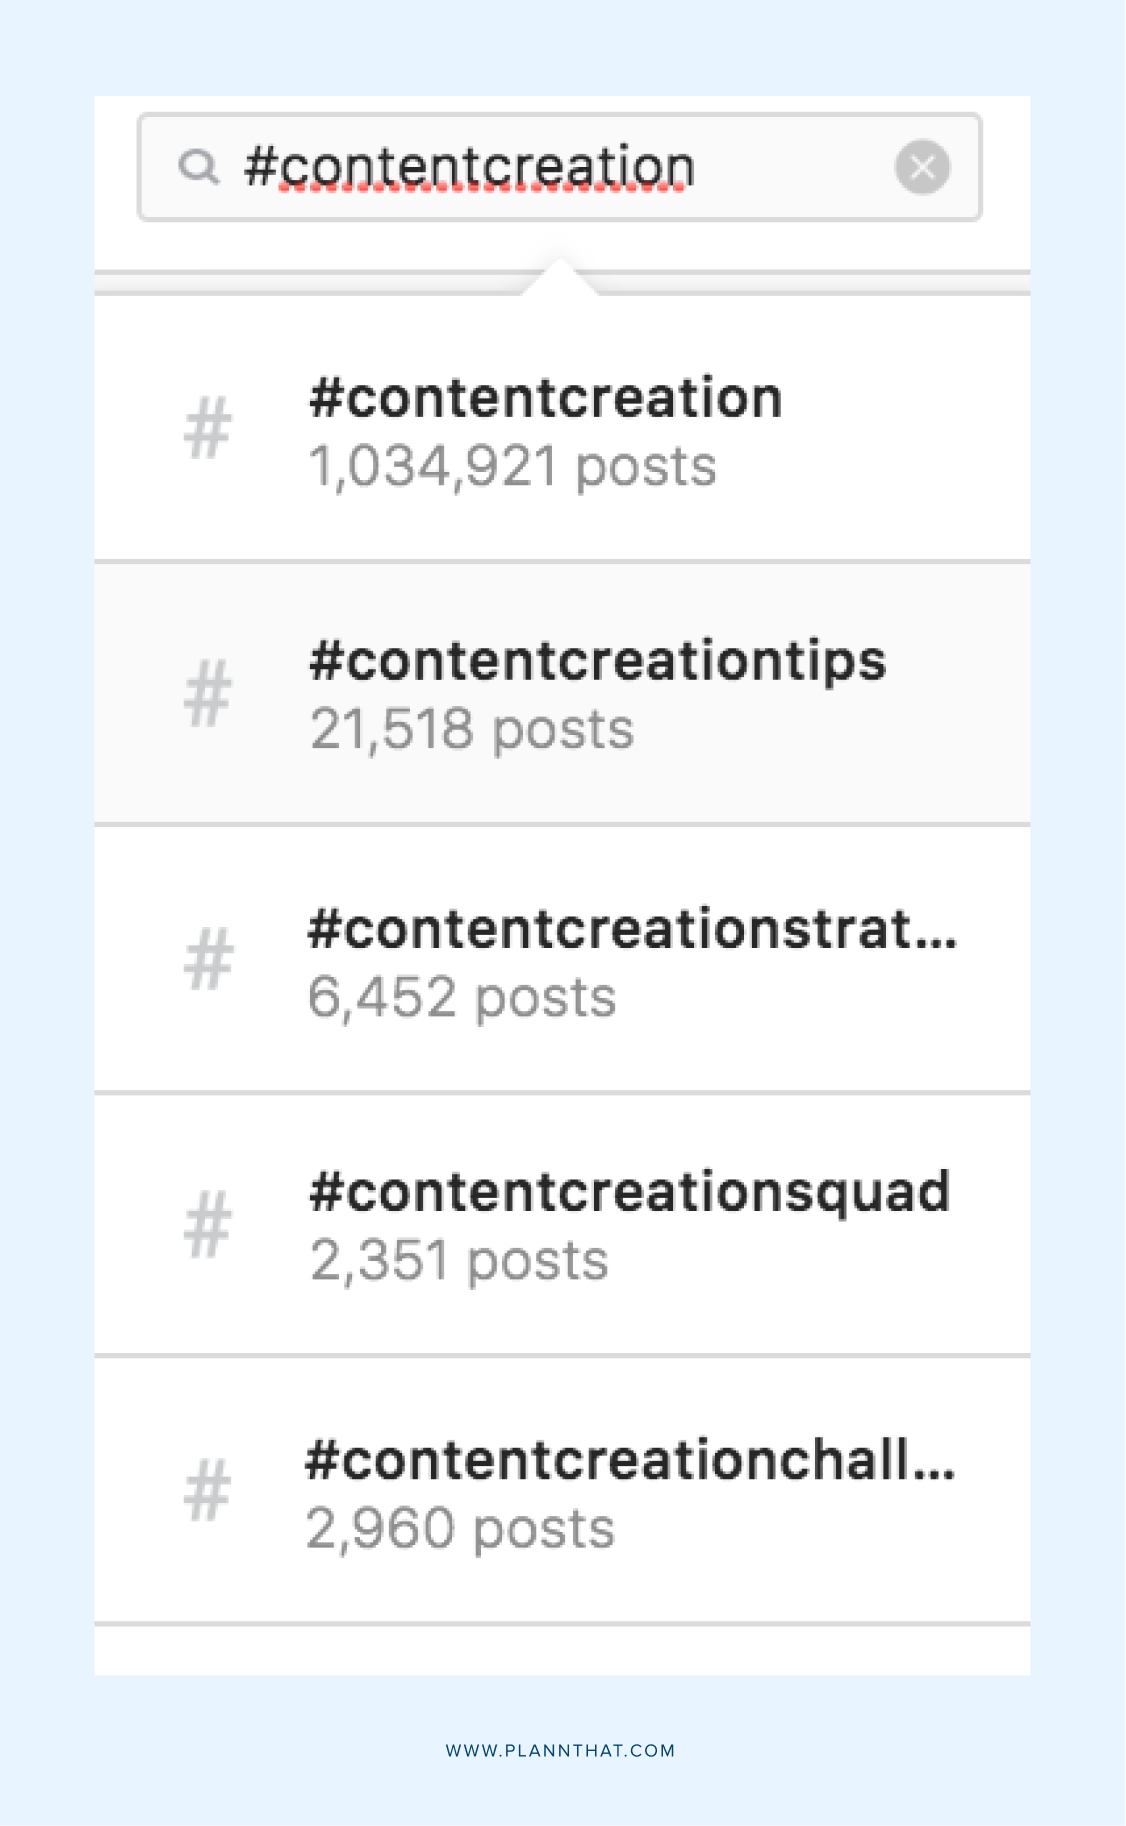 How to save time with hashtag collections